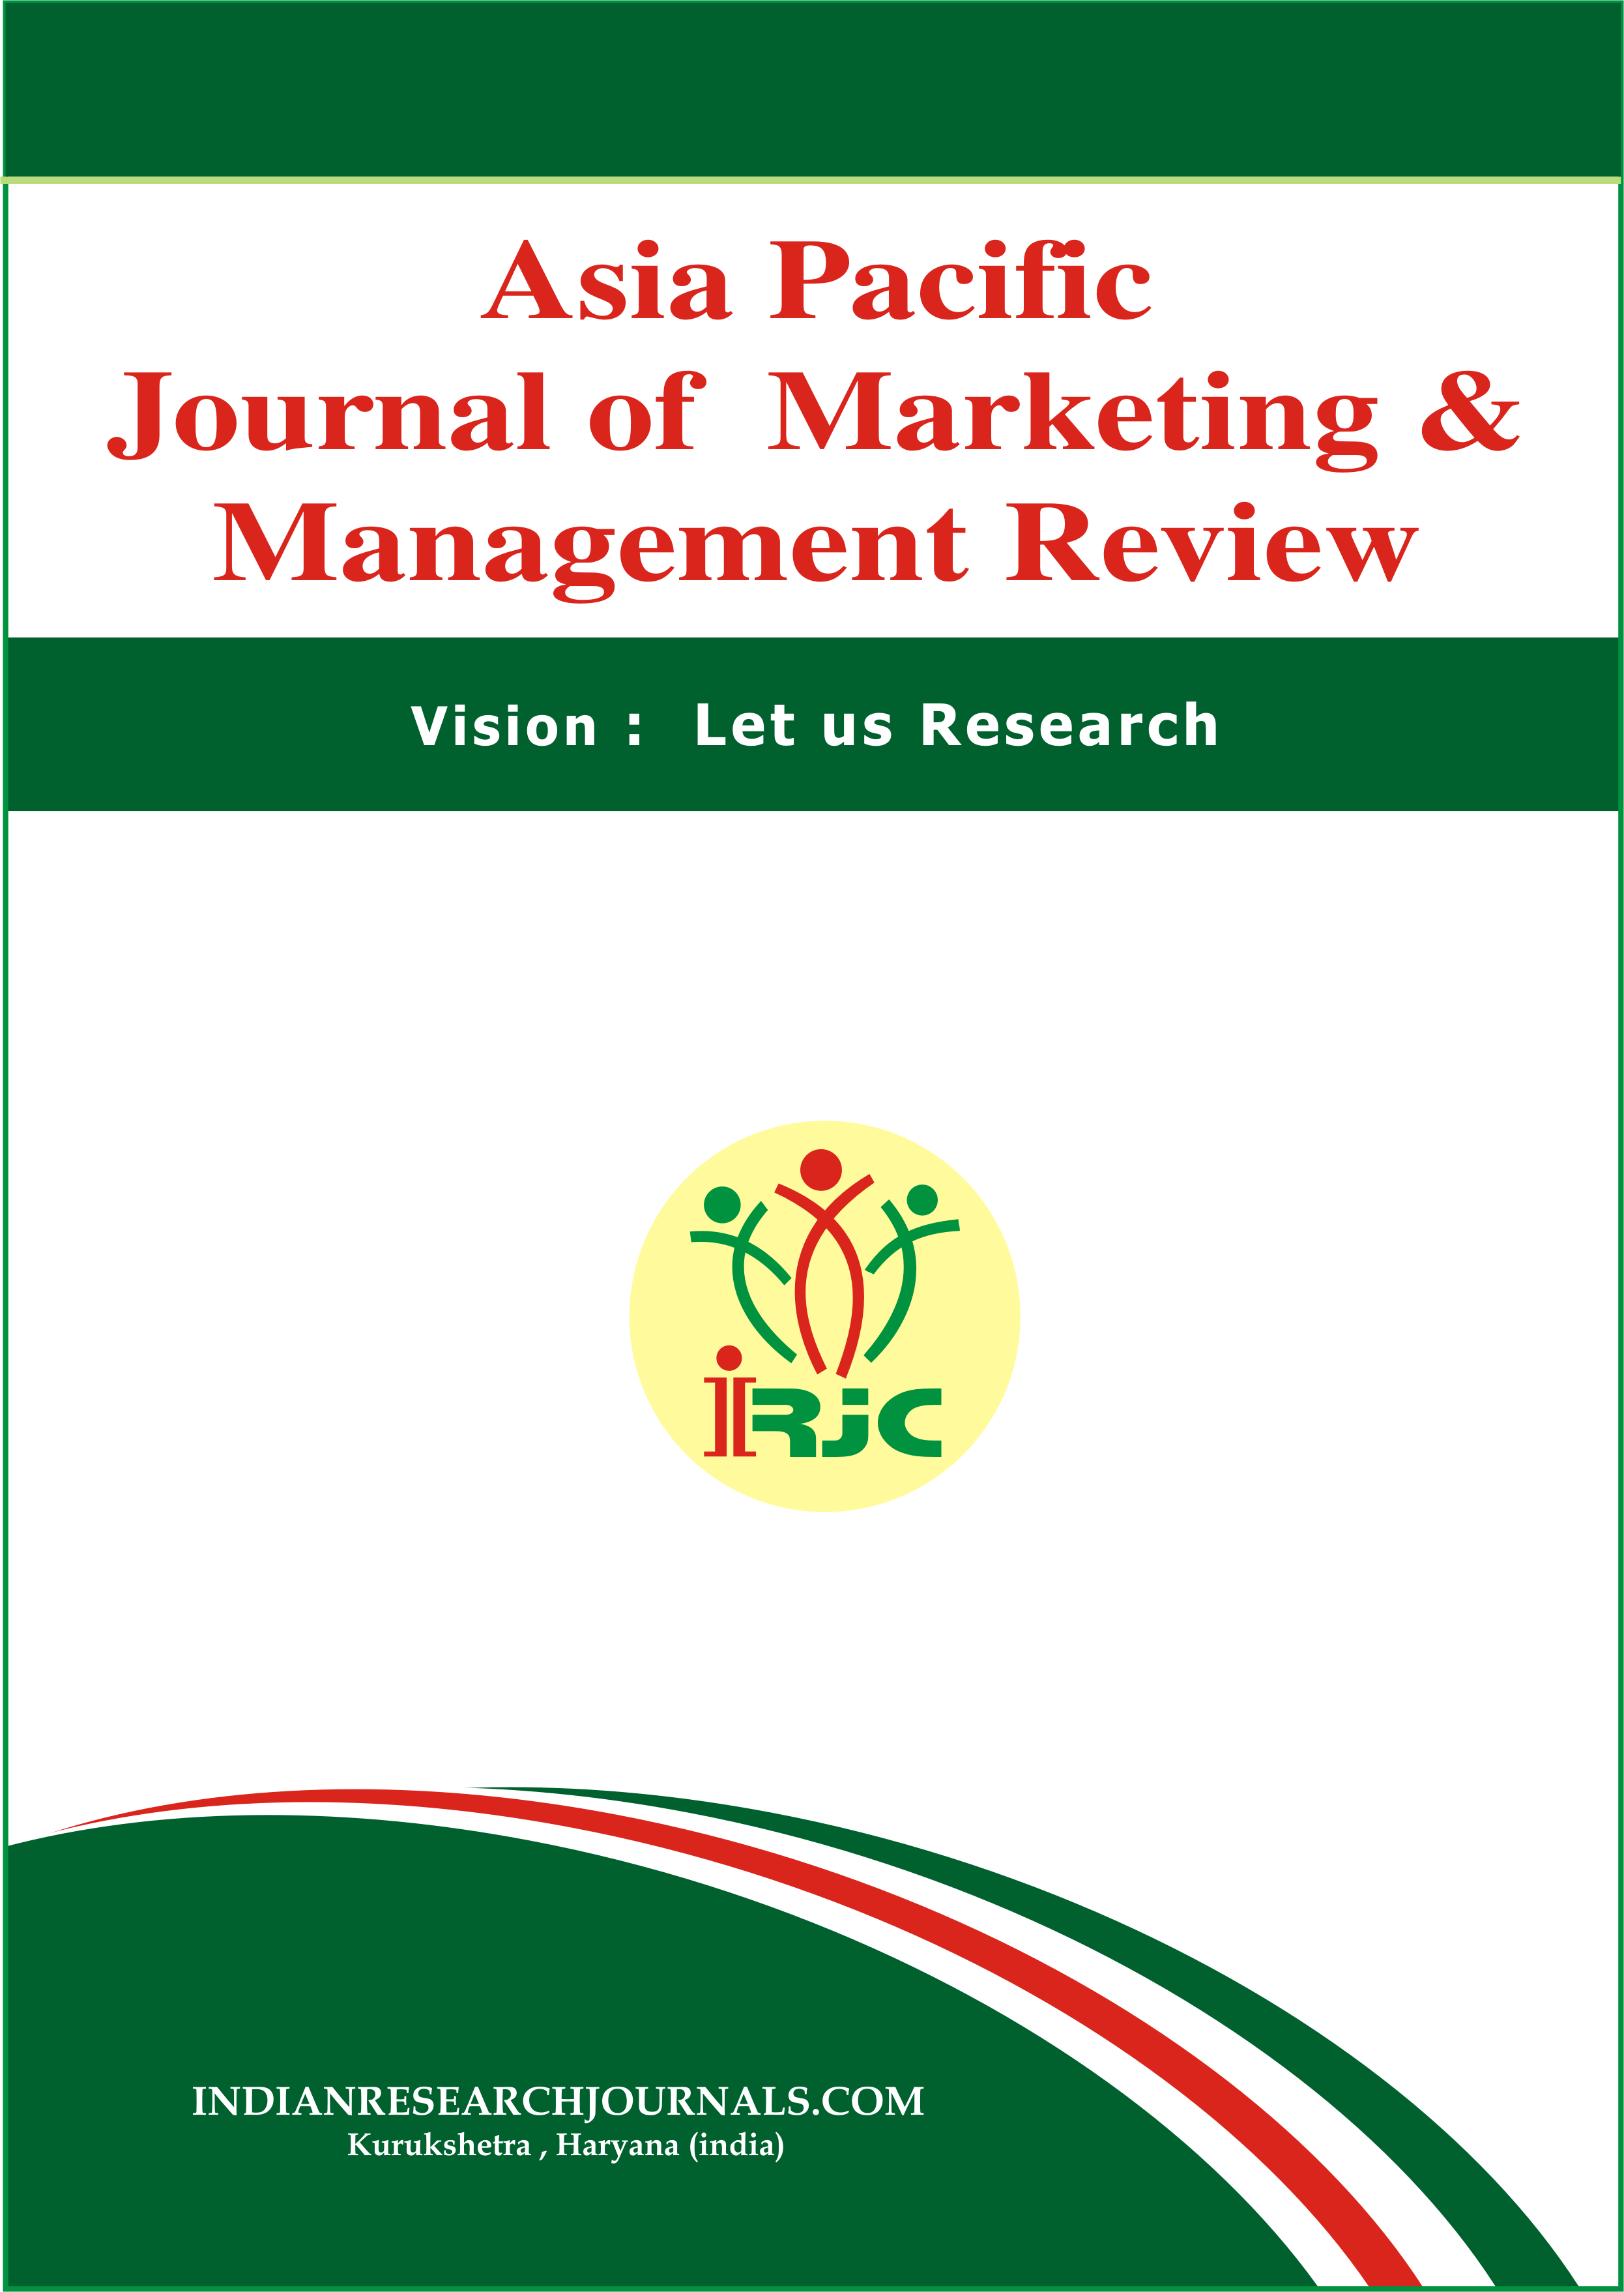 					Visualizza V. 11 N. 05 (2022): ASIA PACIFIC JOURNAL OF MARKETING & MANAGEMENT REVIEW
				